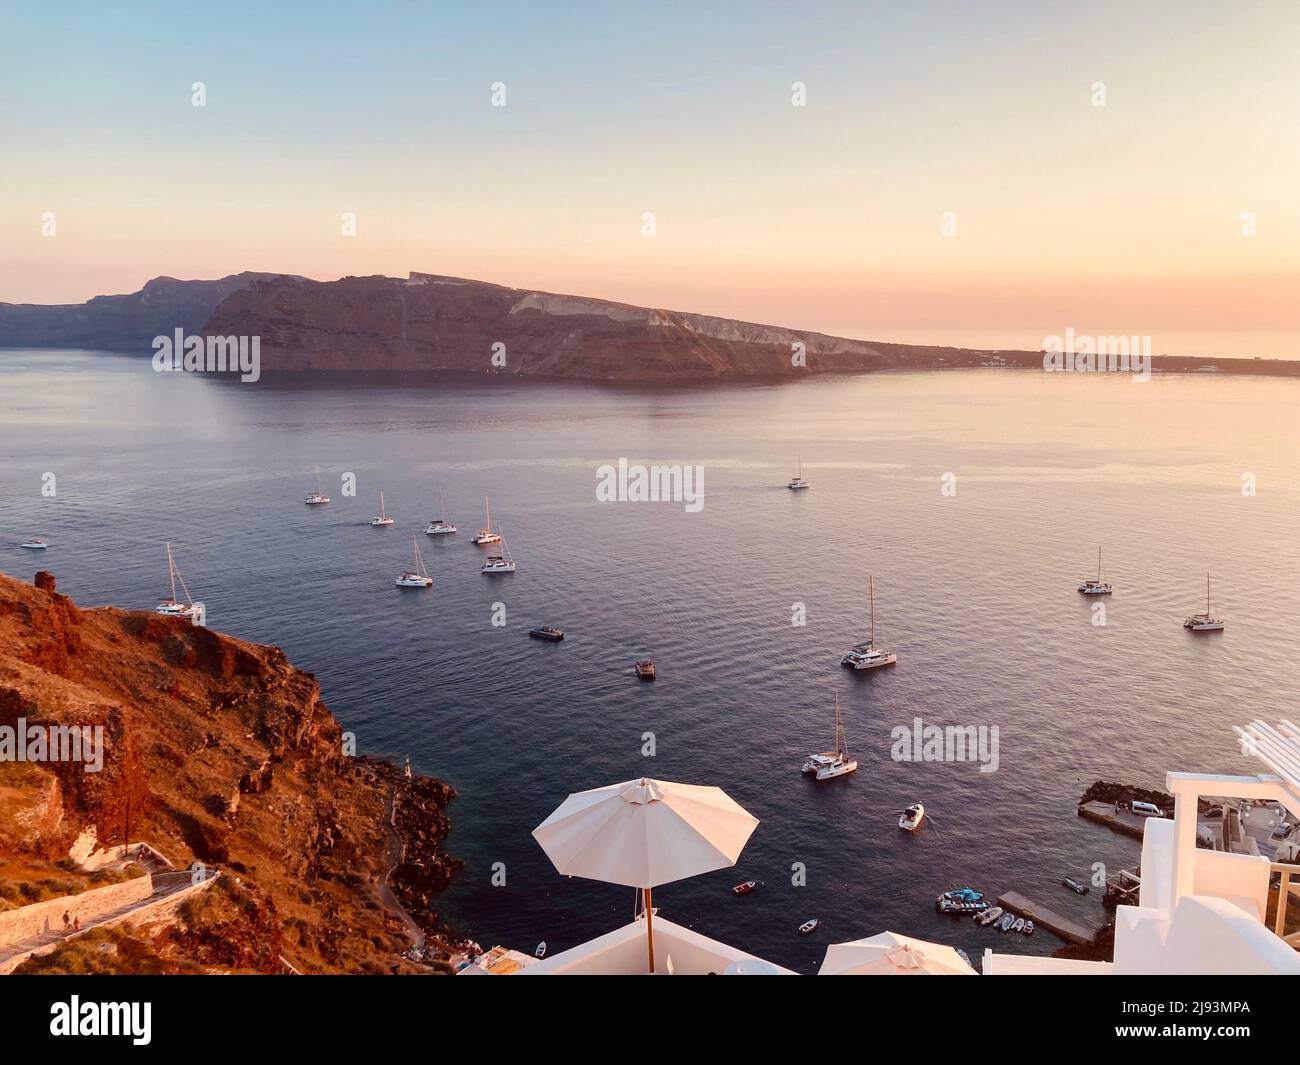 Boats arriving to view the sunset over the greek island of Santorini Stock Photo